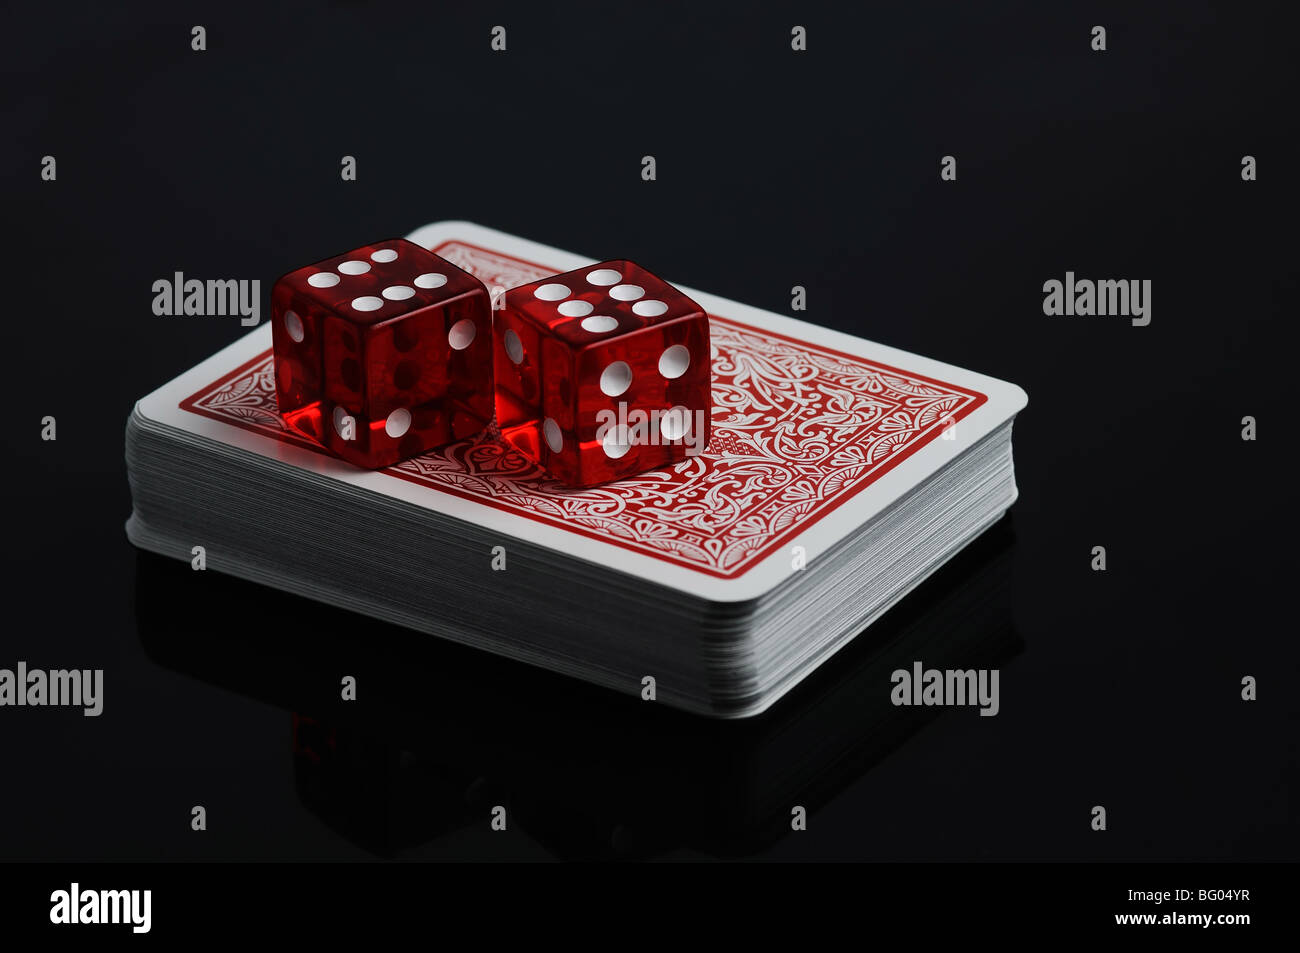 Cards and red dices on a black background Stock Photo